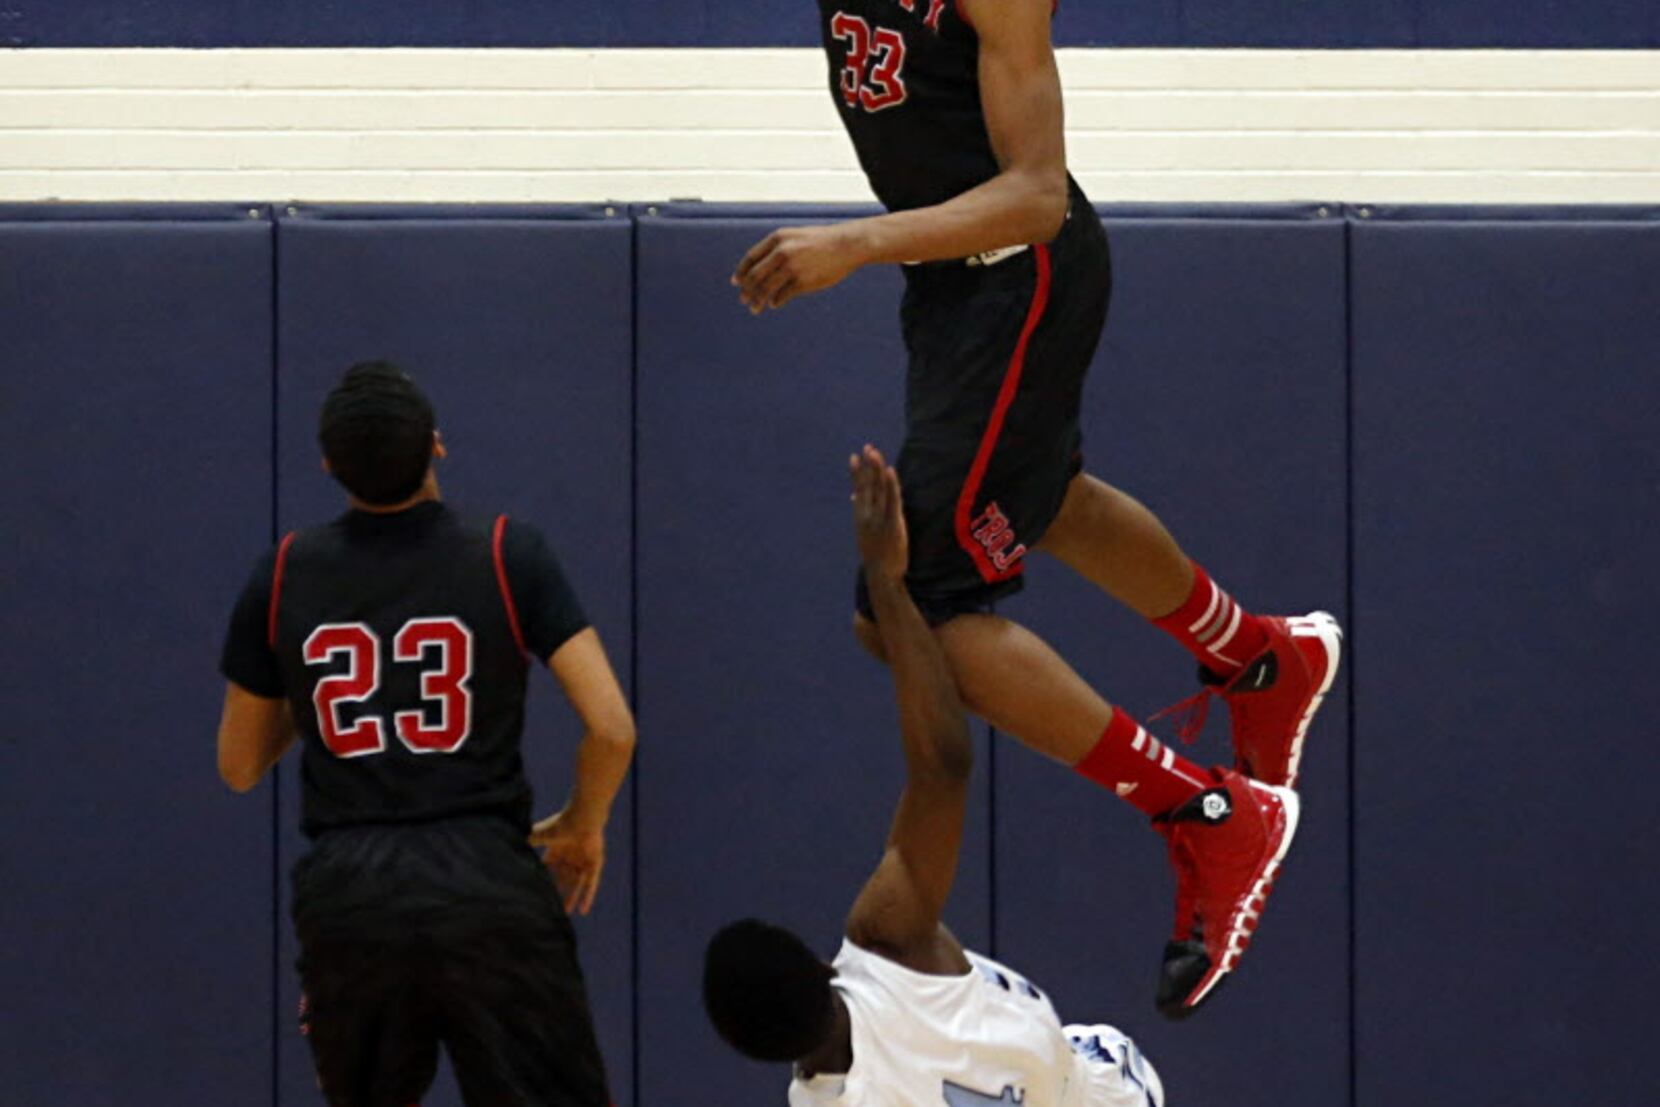 tbt: Check out Euless Trinity, Longhorn product Myles Turner's